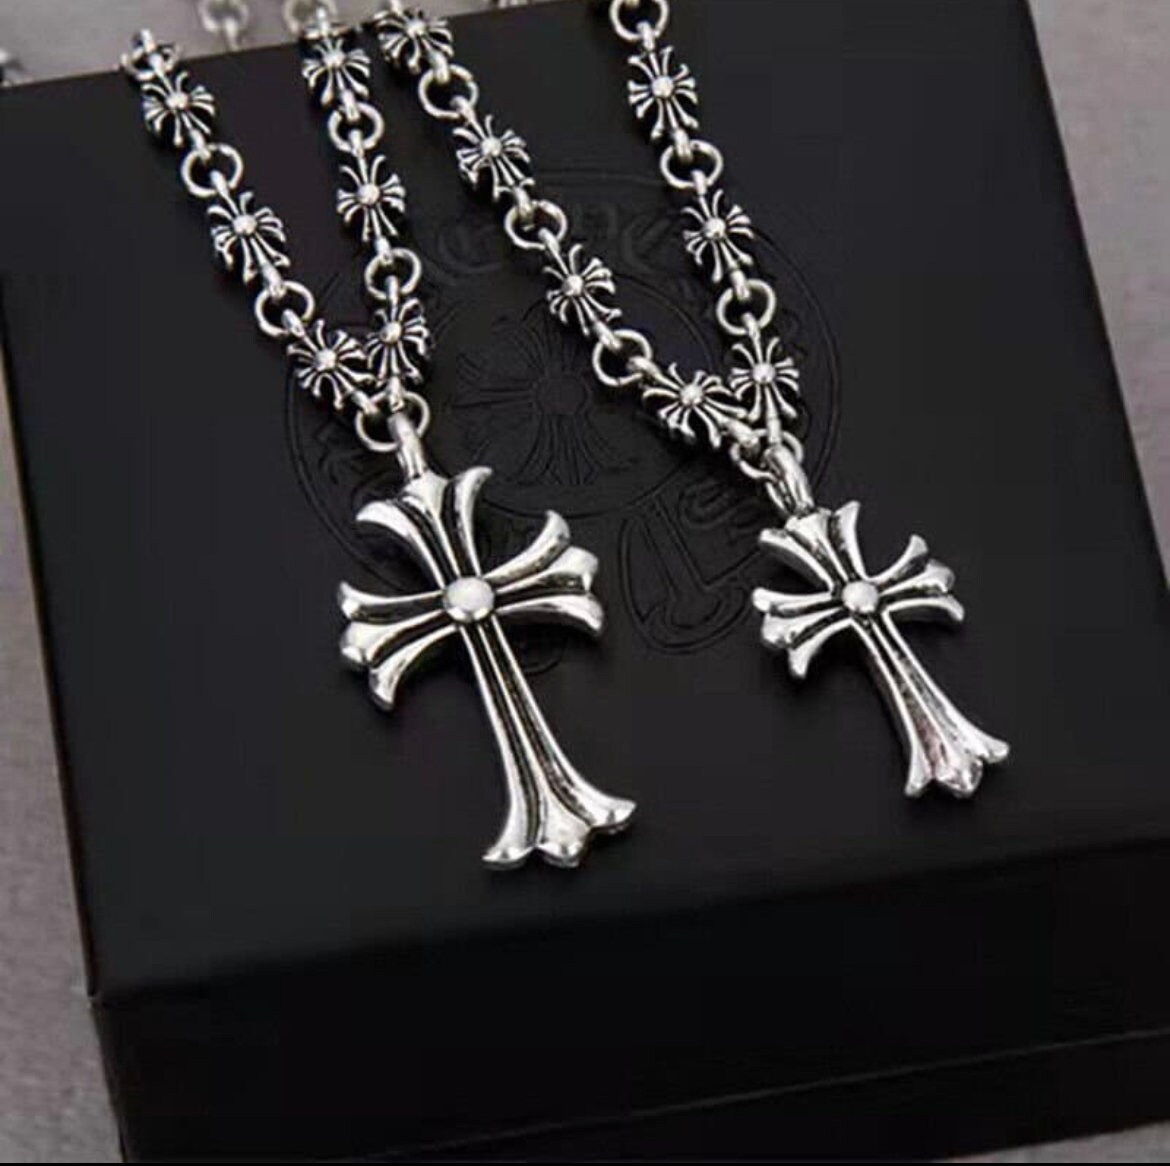 CHROME HEARTS STYLE Chain Cross Necklace Silver Plated - Etsy